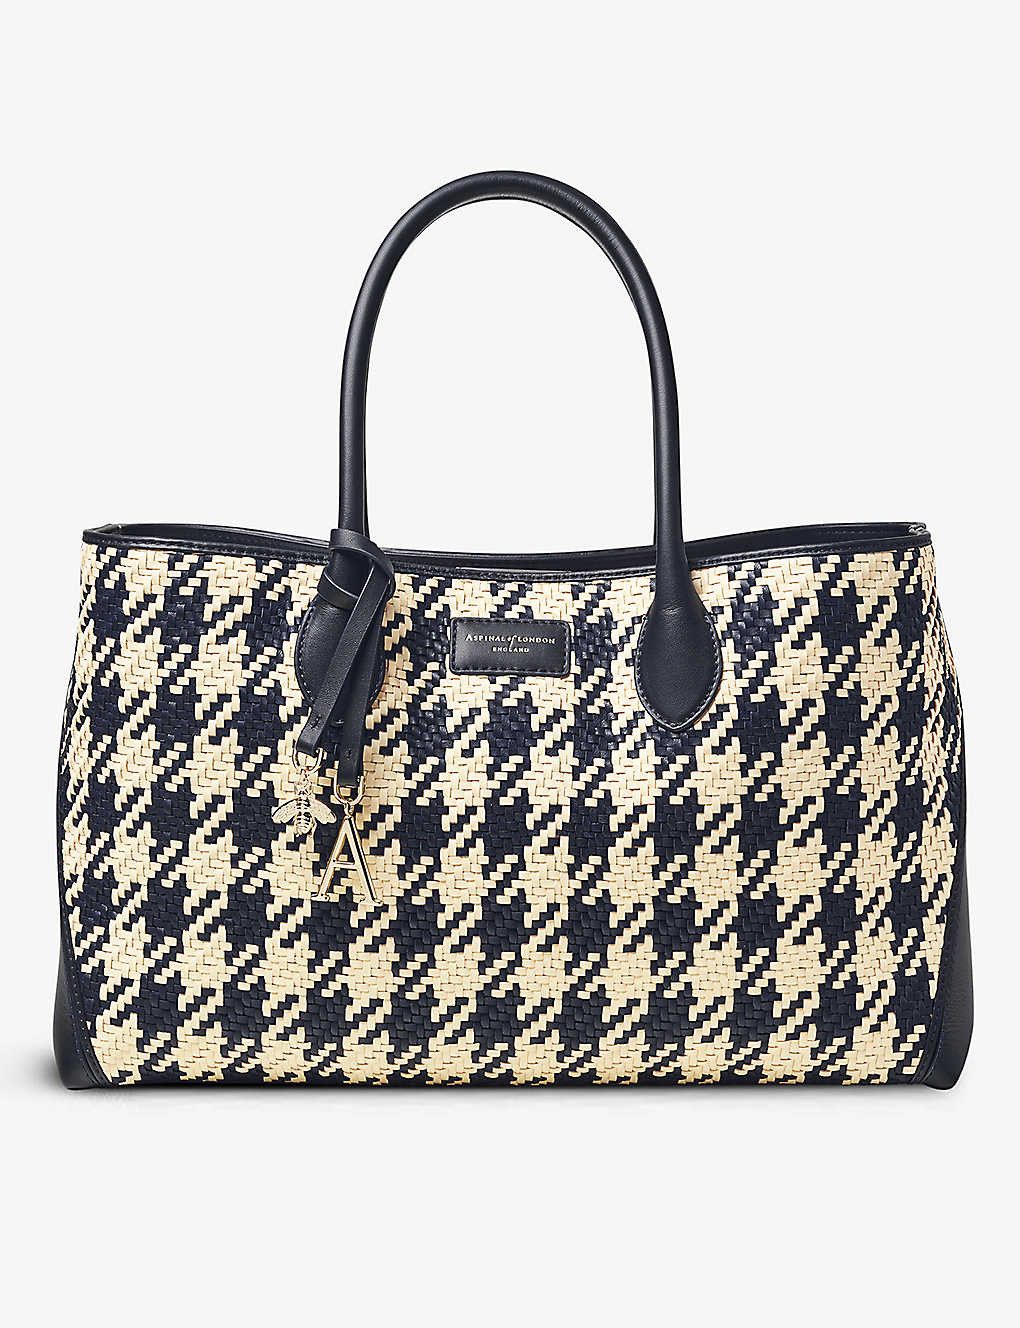 Aspinal Of London Womens Navy London Houndstooth Interwoven Leather Tote Bag